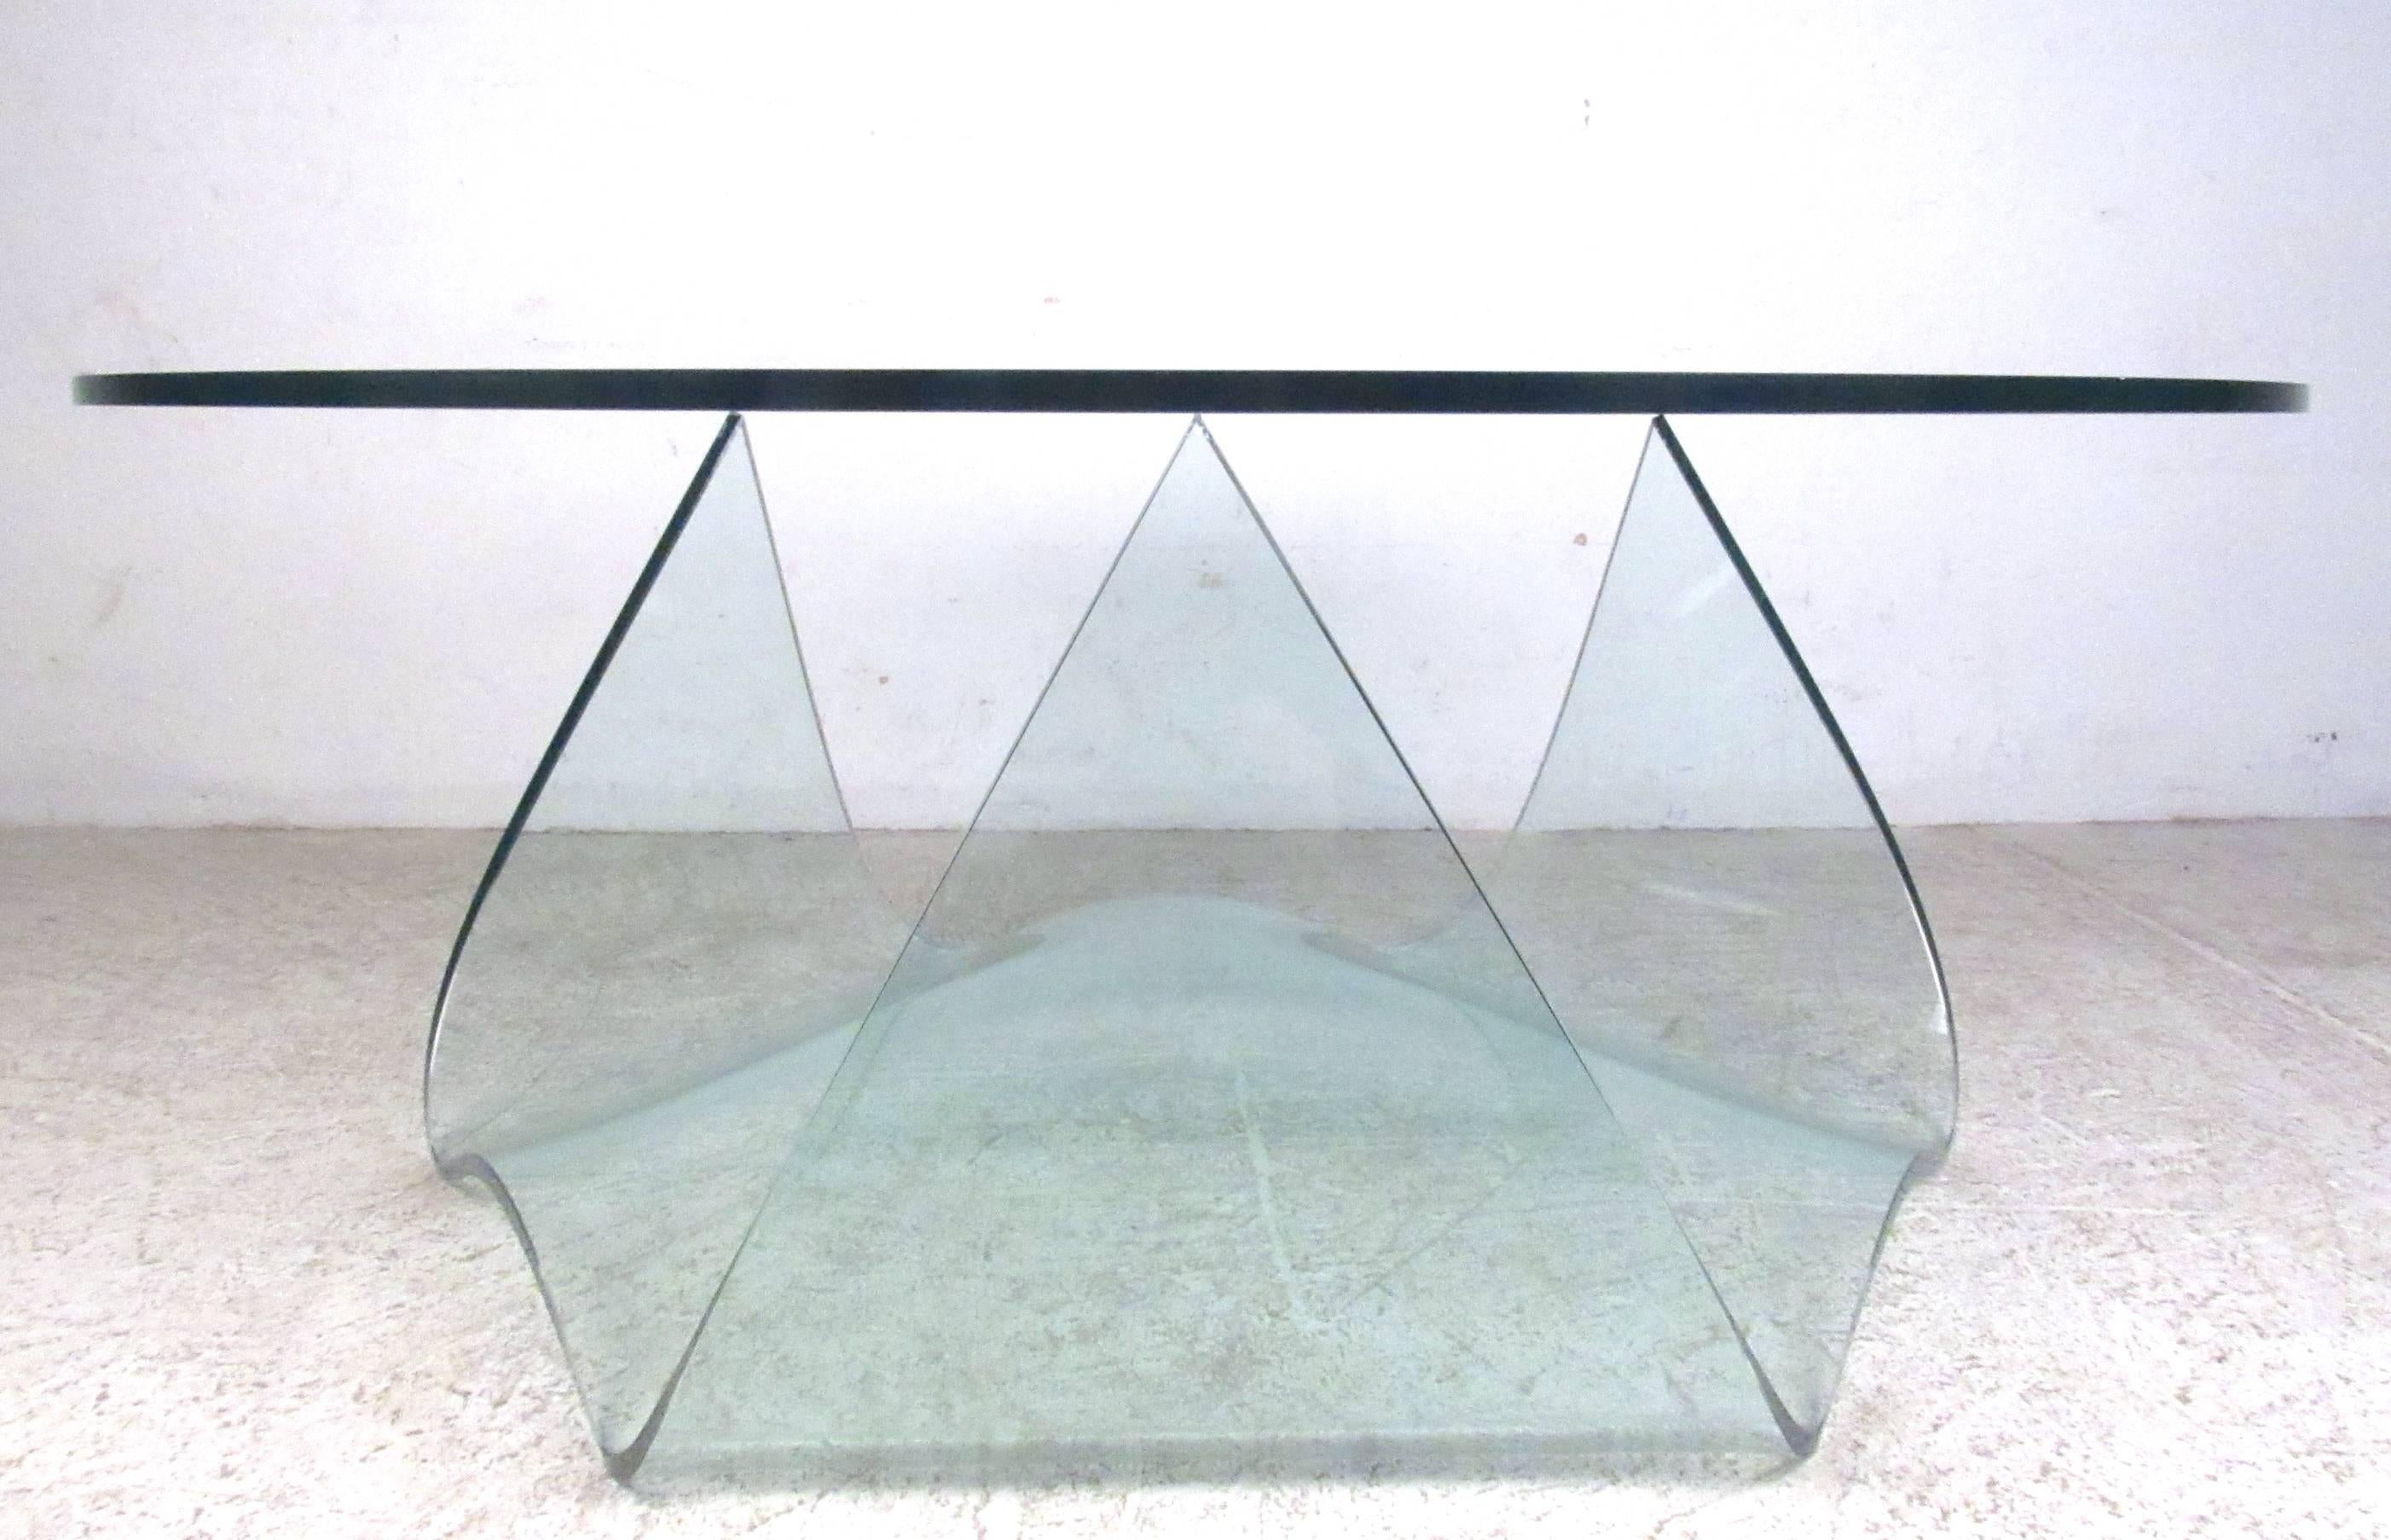 This beautiful vintage table features artisan style molded glass base with a round glass top. The truly unique fluid style of this all glass table makes a wonderful modern statement in any interior. Please confirm item location (NY or NJ).